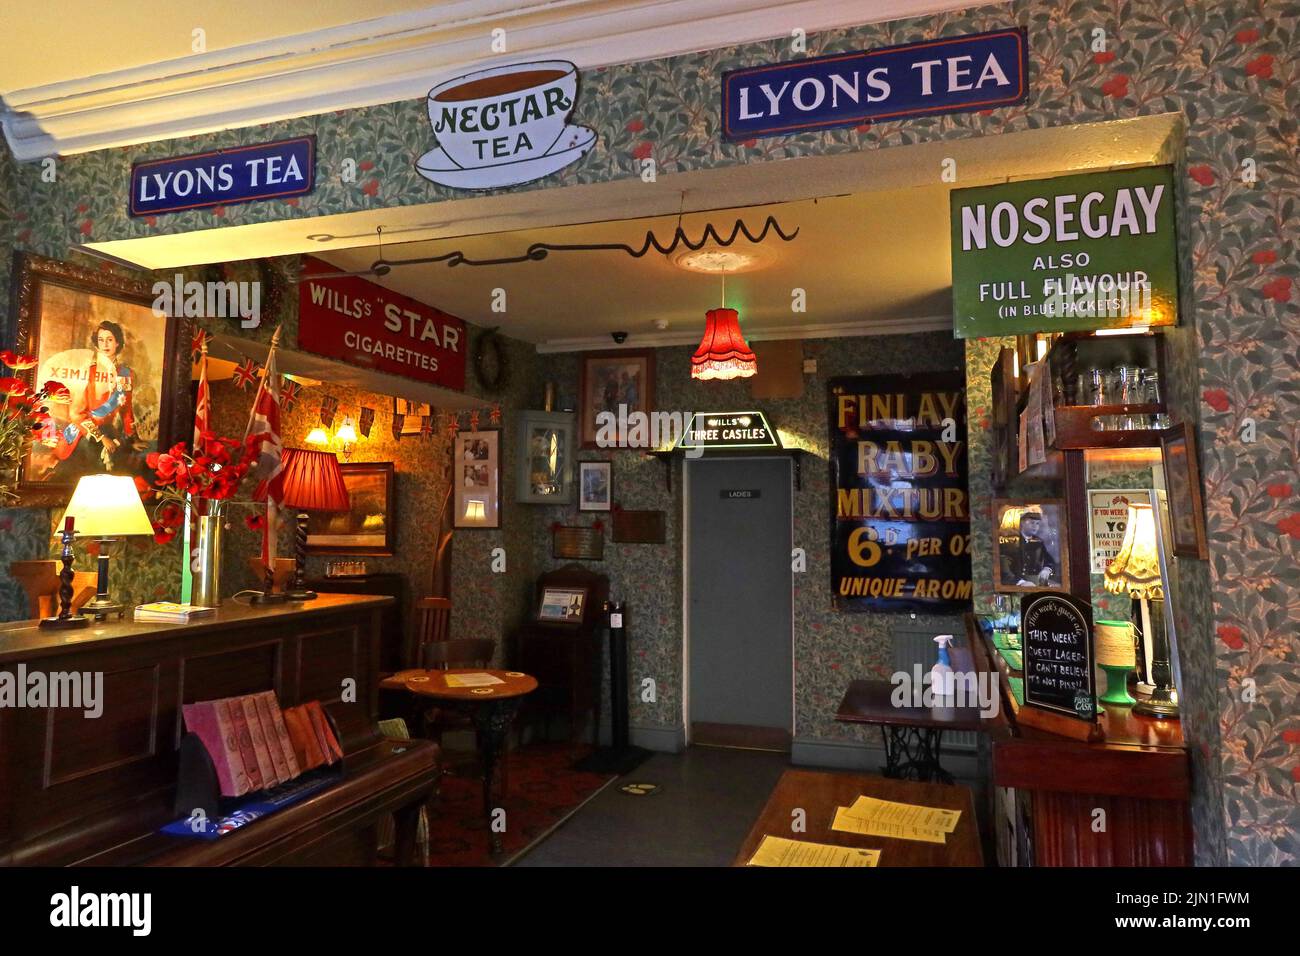 Adverts for Lyons Tea, Nosegay also full flavour, Wills, Interior of The Albion Inn, Volunteer St / Park St, Chester, Cheshire, England, UK, CH1 1RN Stock Photo